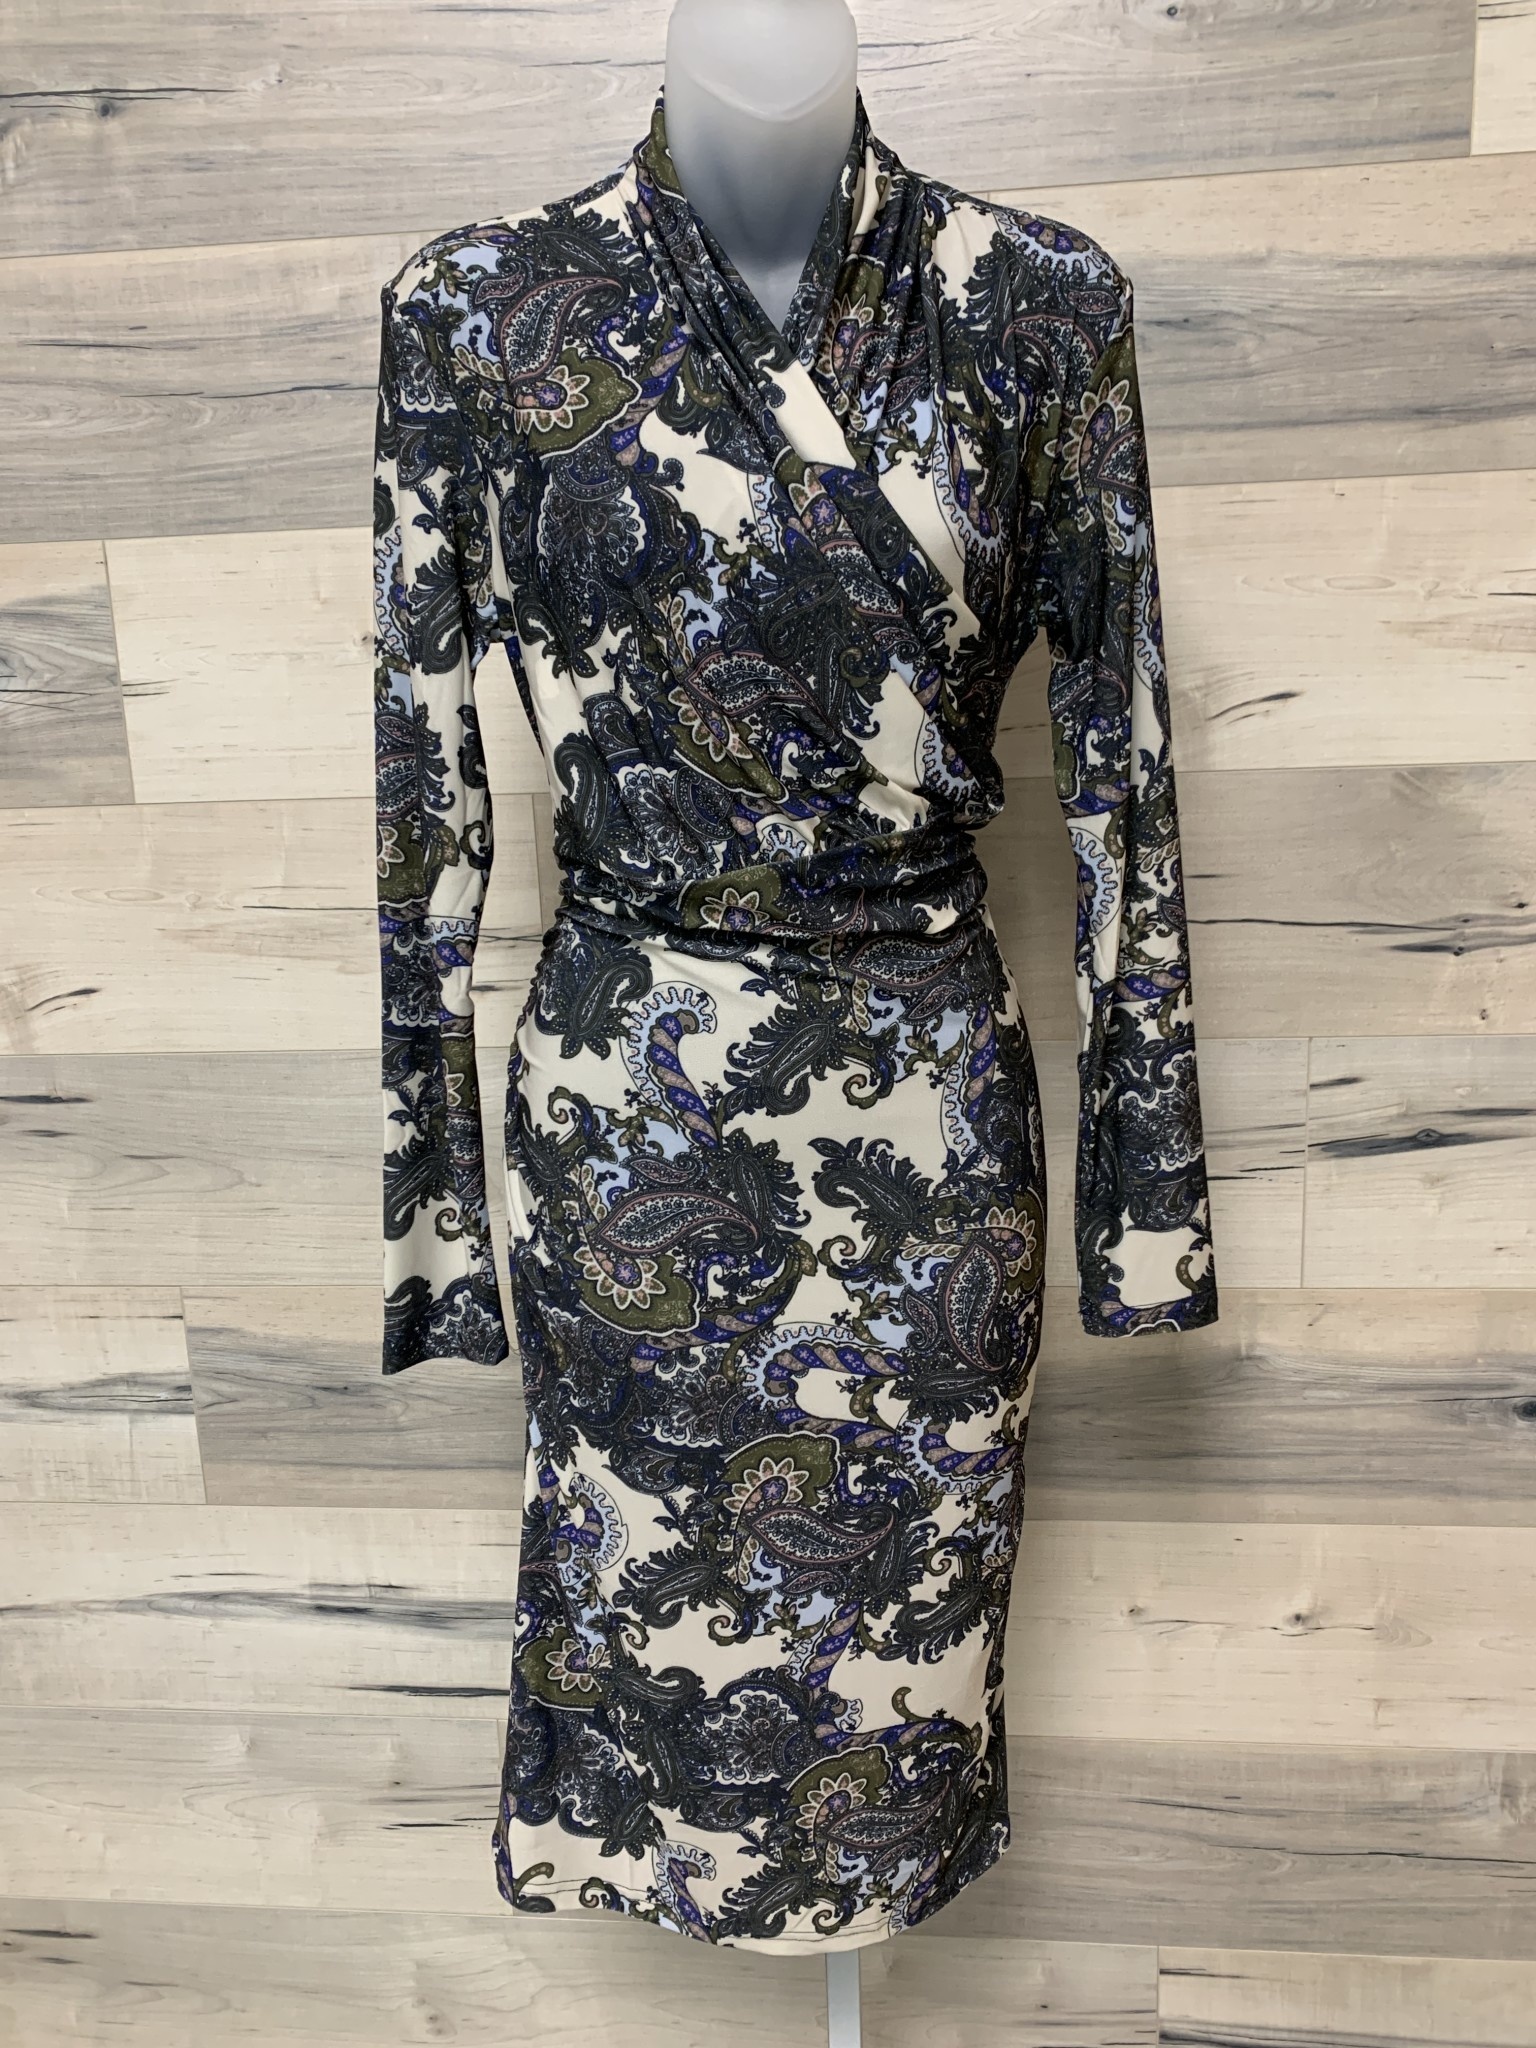 Dress with Faux Wrap on Bodice - Navy and Olive Paisley